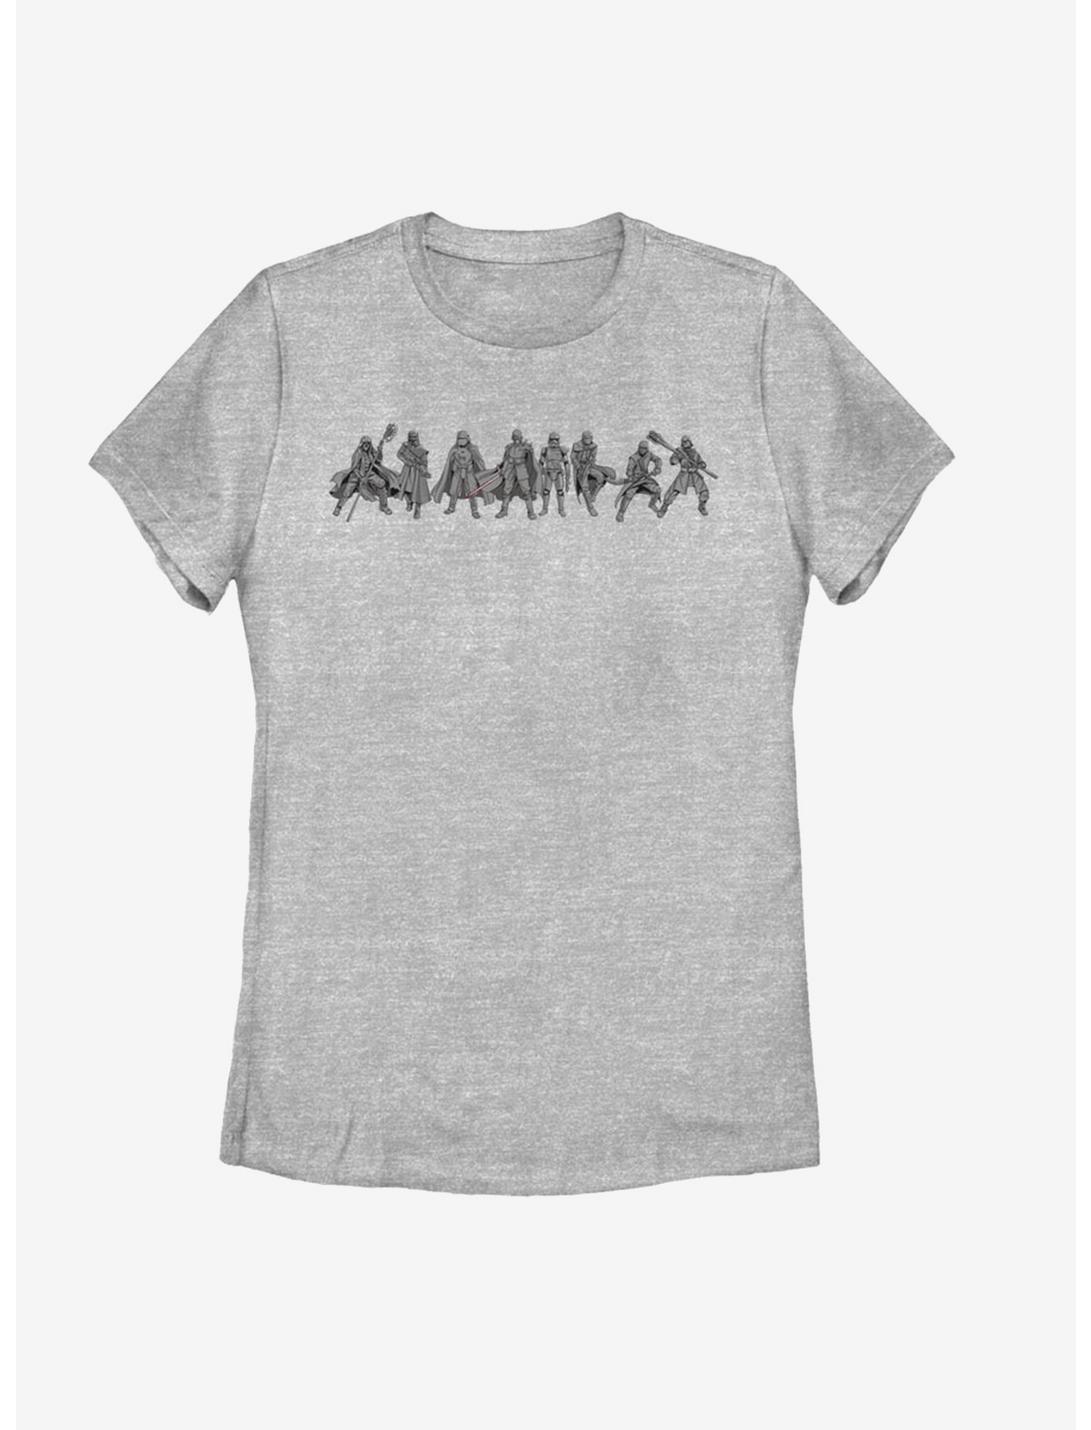 Star Wars Episode IX The Rise Of Skywalker New Order Lineup Womens T-Shirt, ATH HTR, hi-res